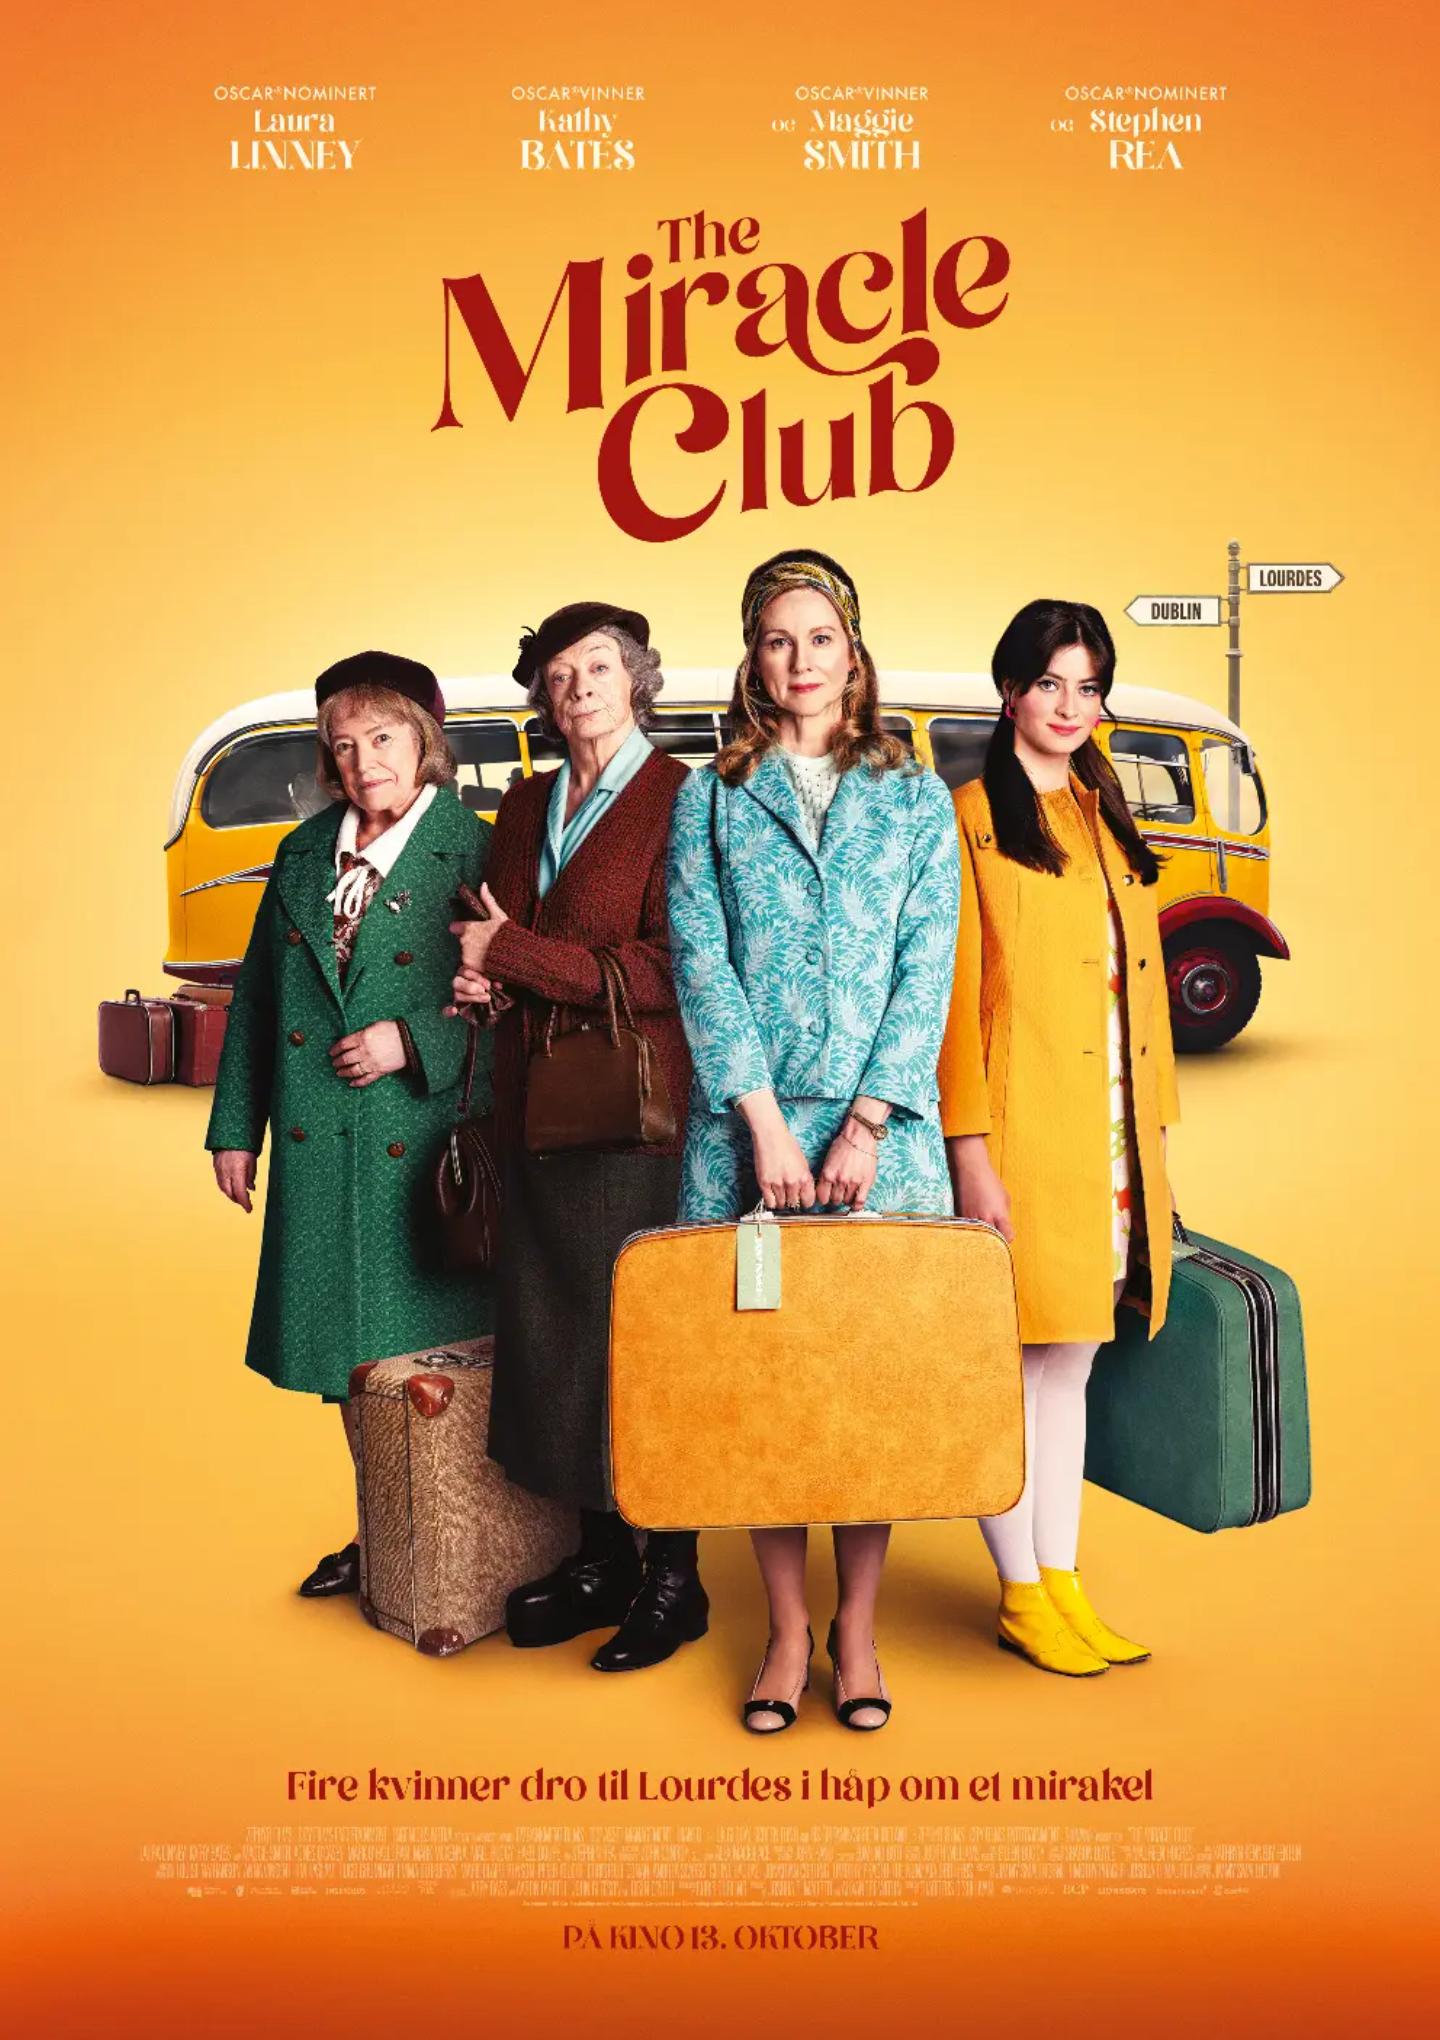 Plakat for 'The Miracle Club'